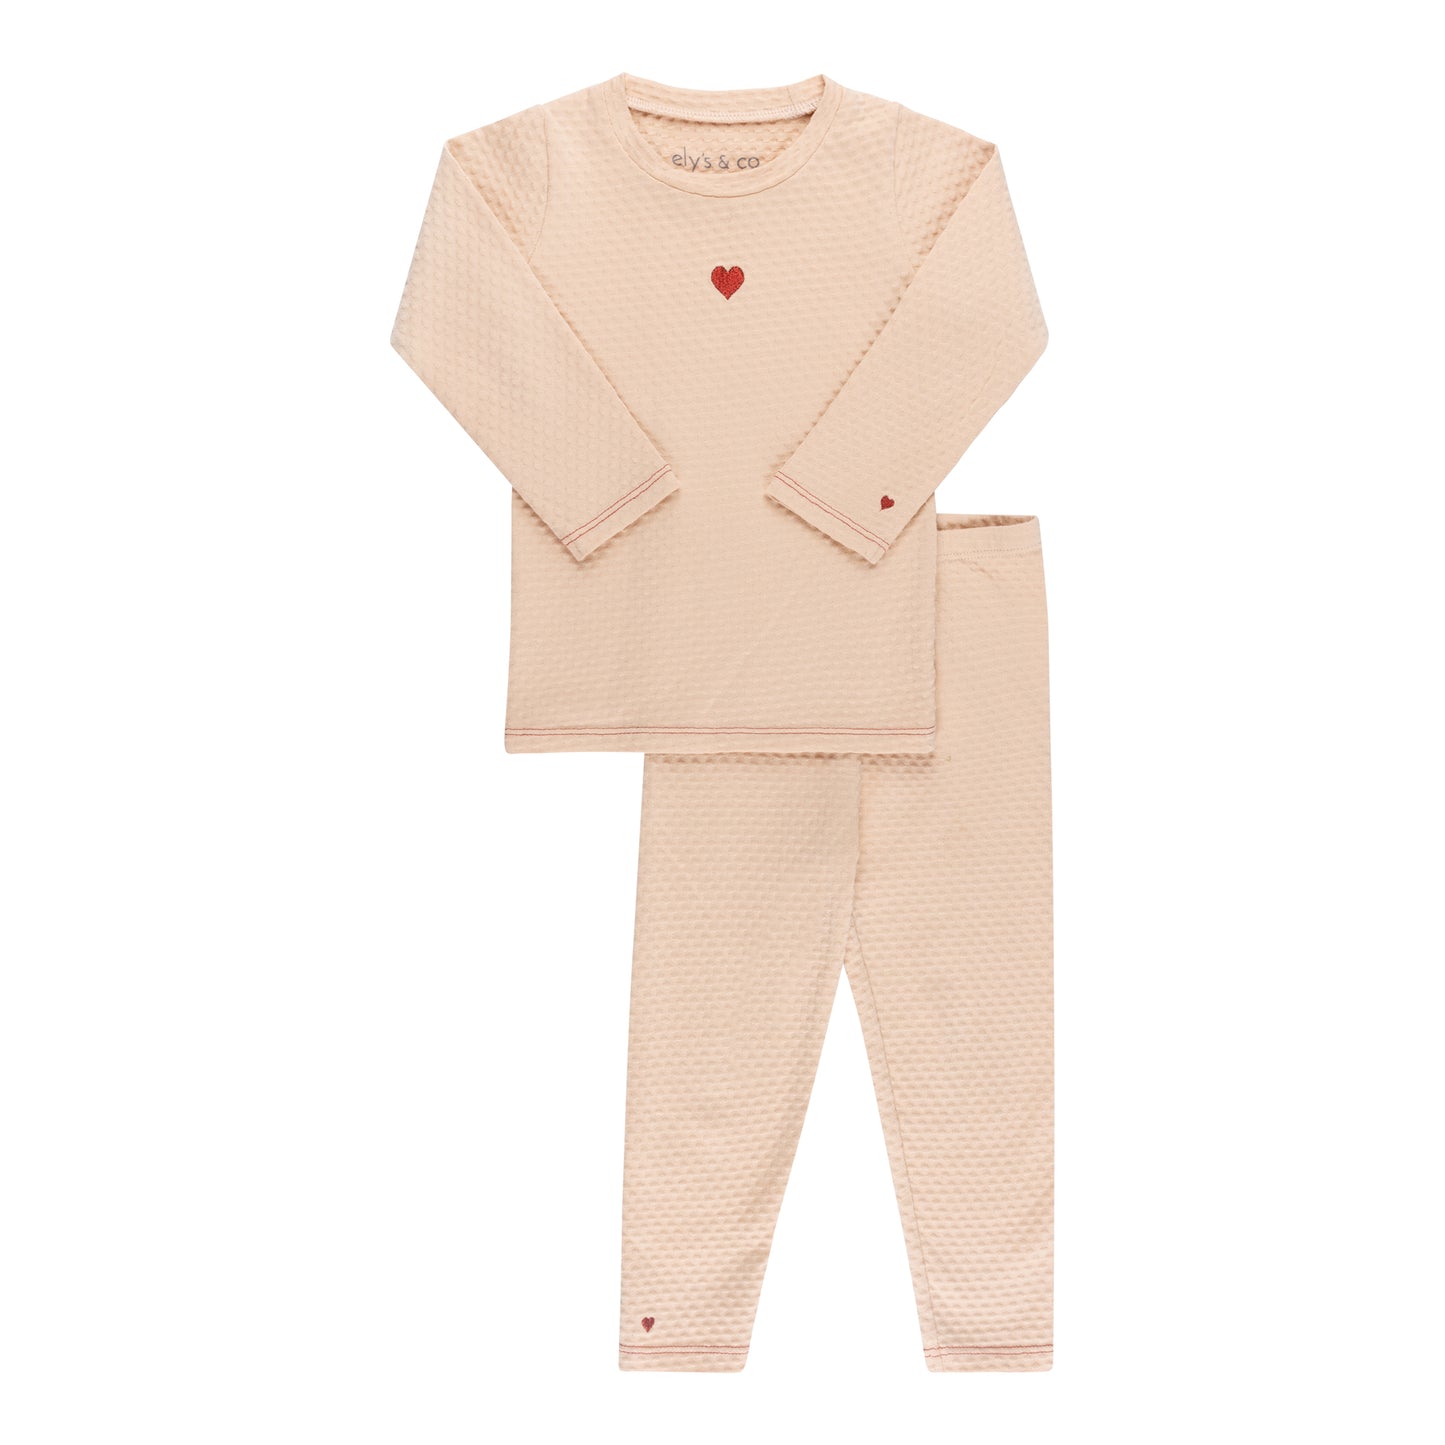 ELY'S & CO. PINK EMBROIDERED HEART LOUNGE SET [FINAL SALE]